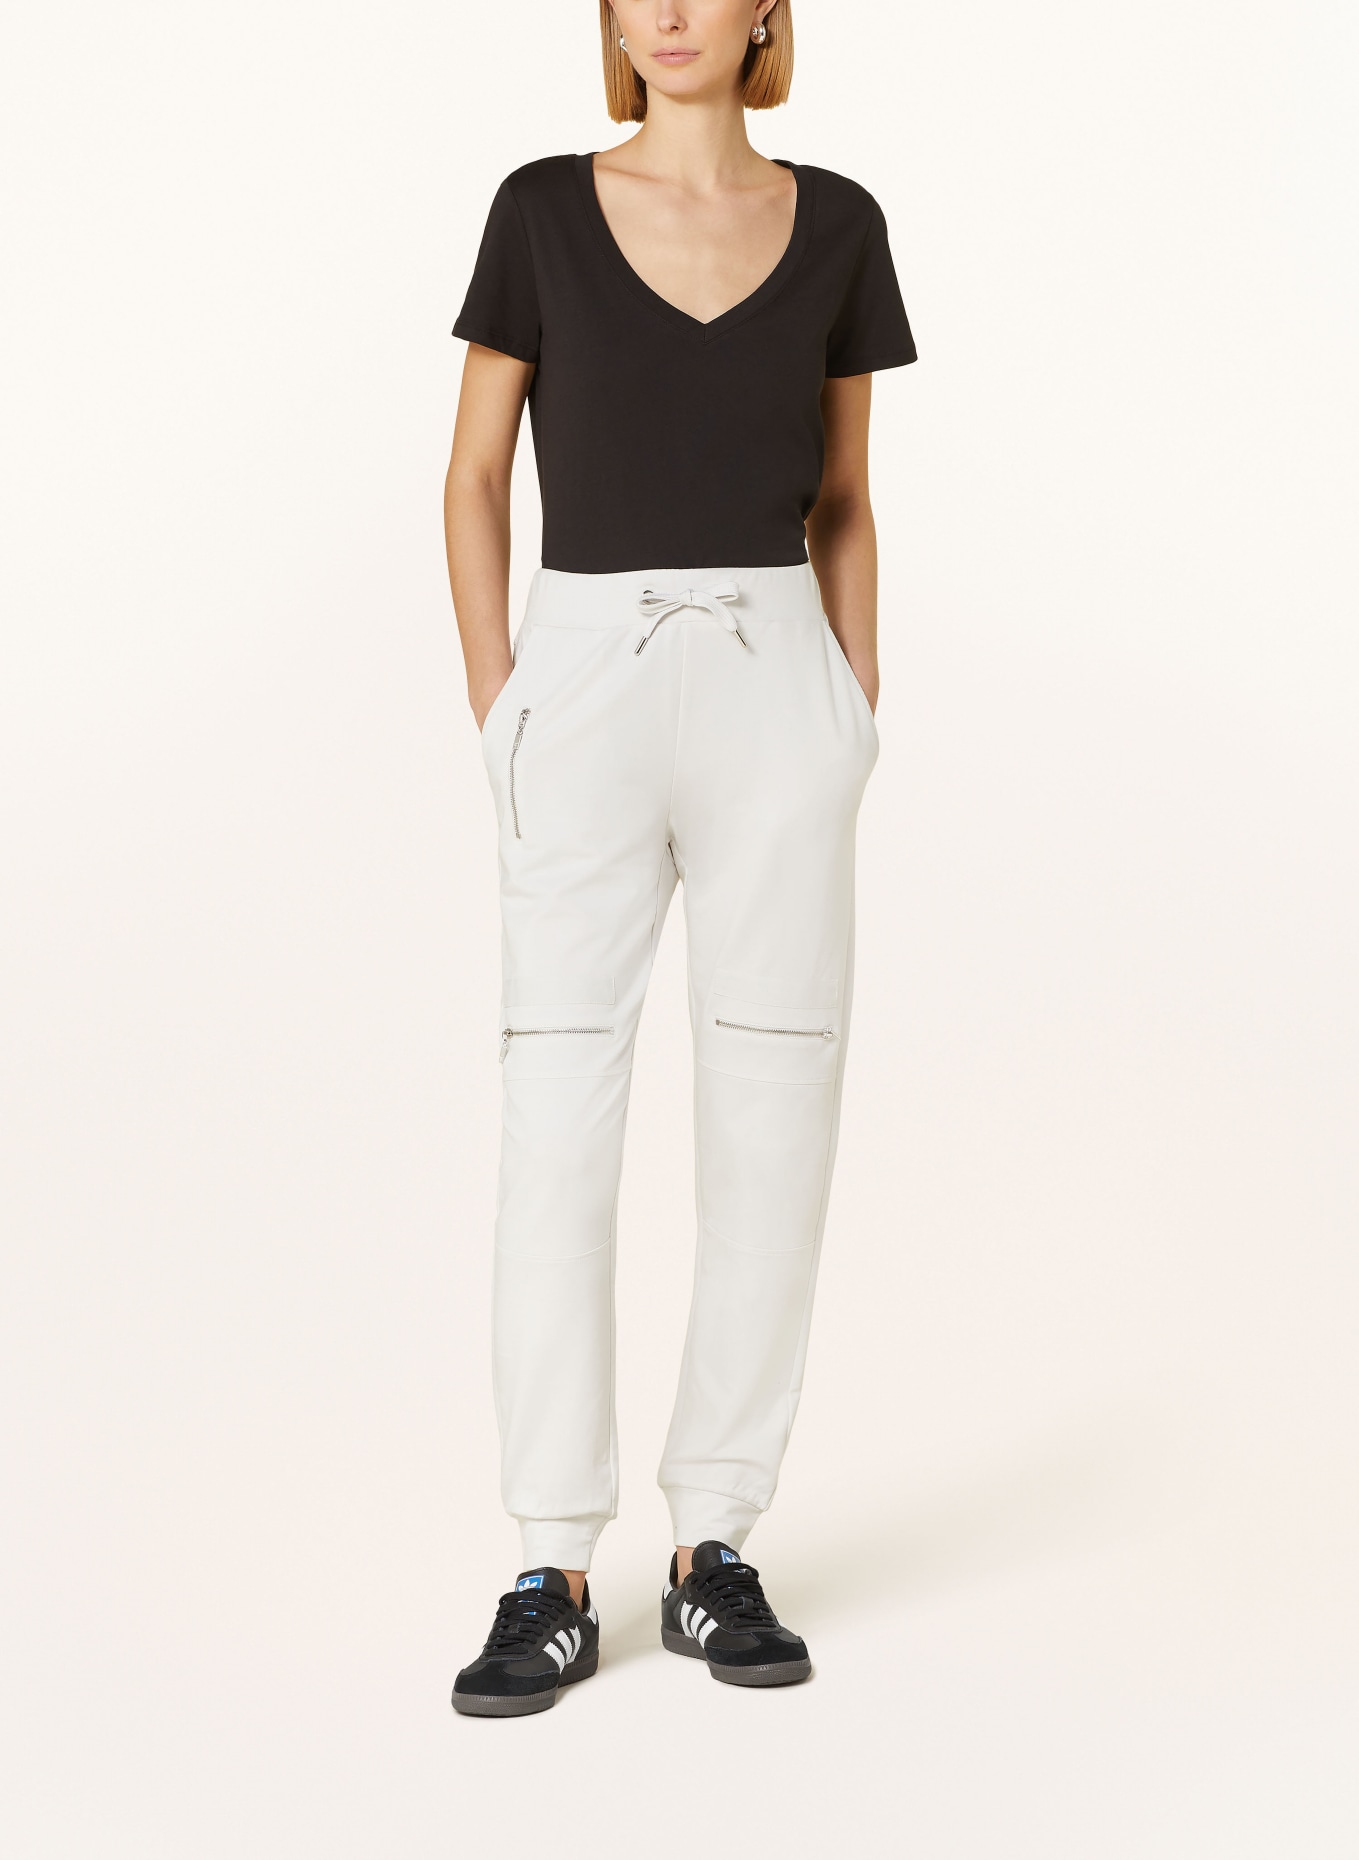 monari Jersey pants in jogger style, Color: LIGHT GRAY (Image 2)